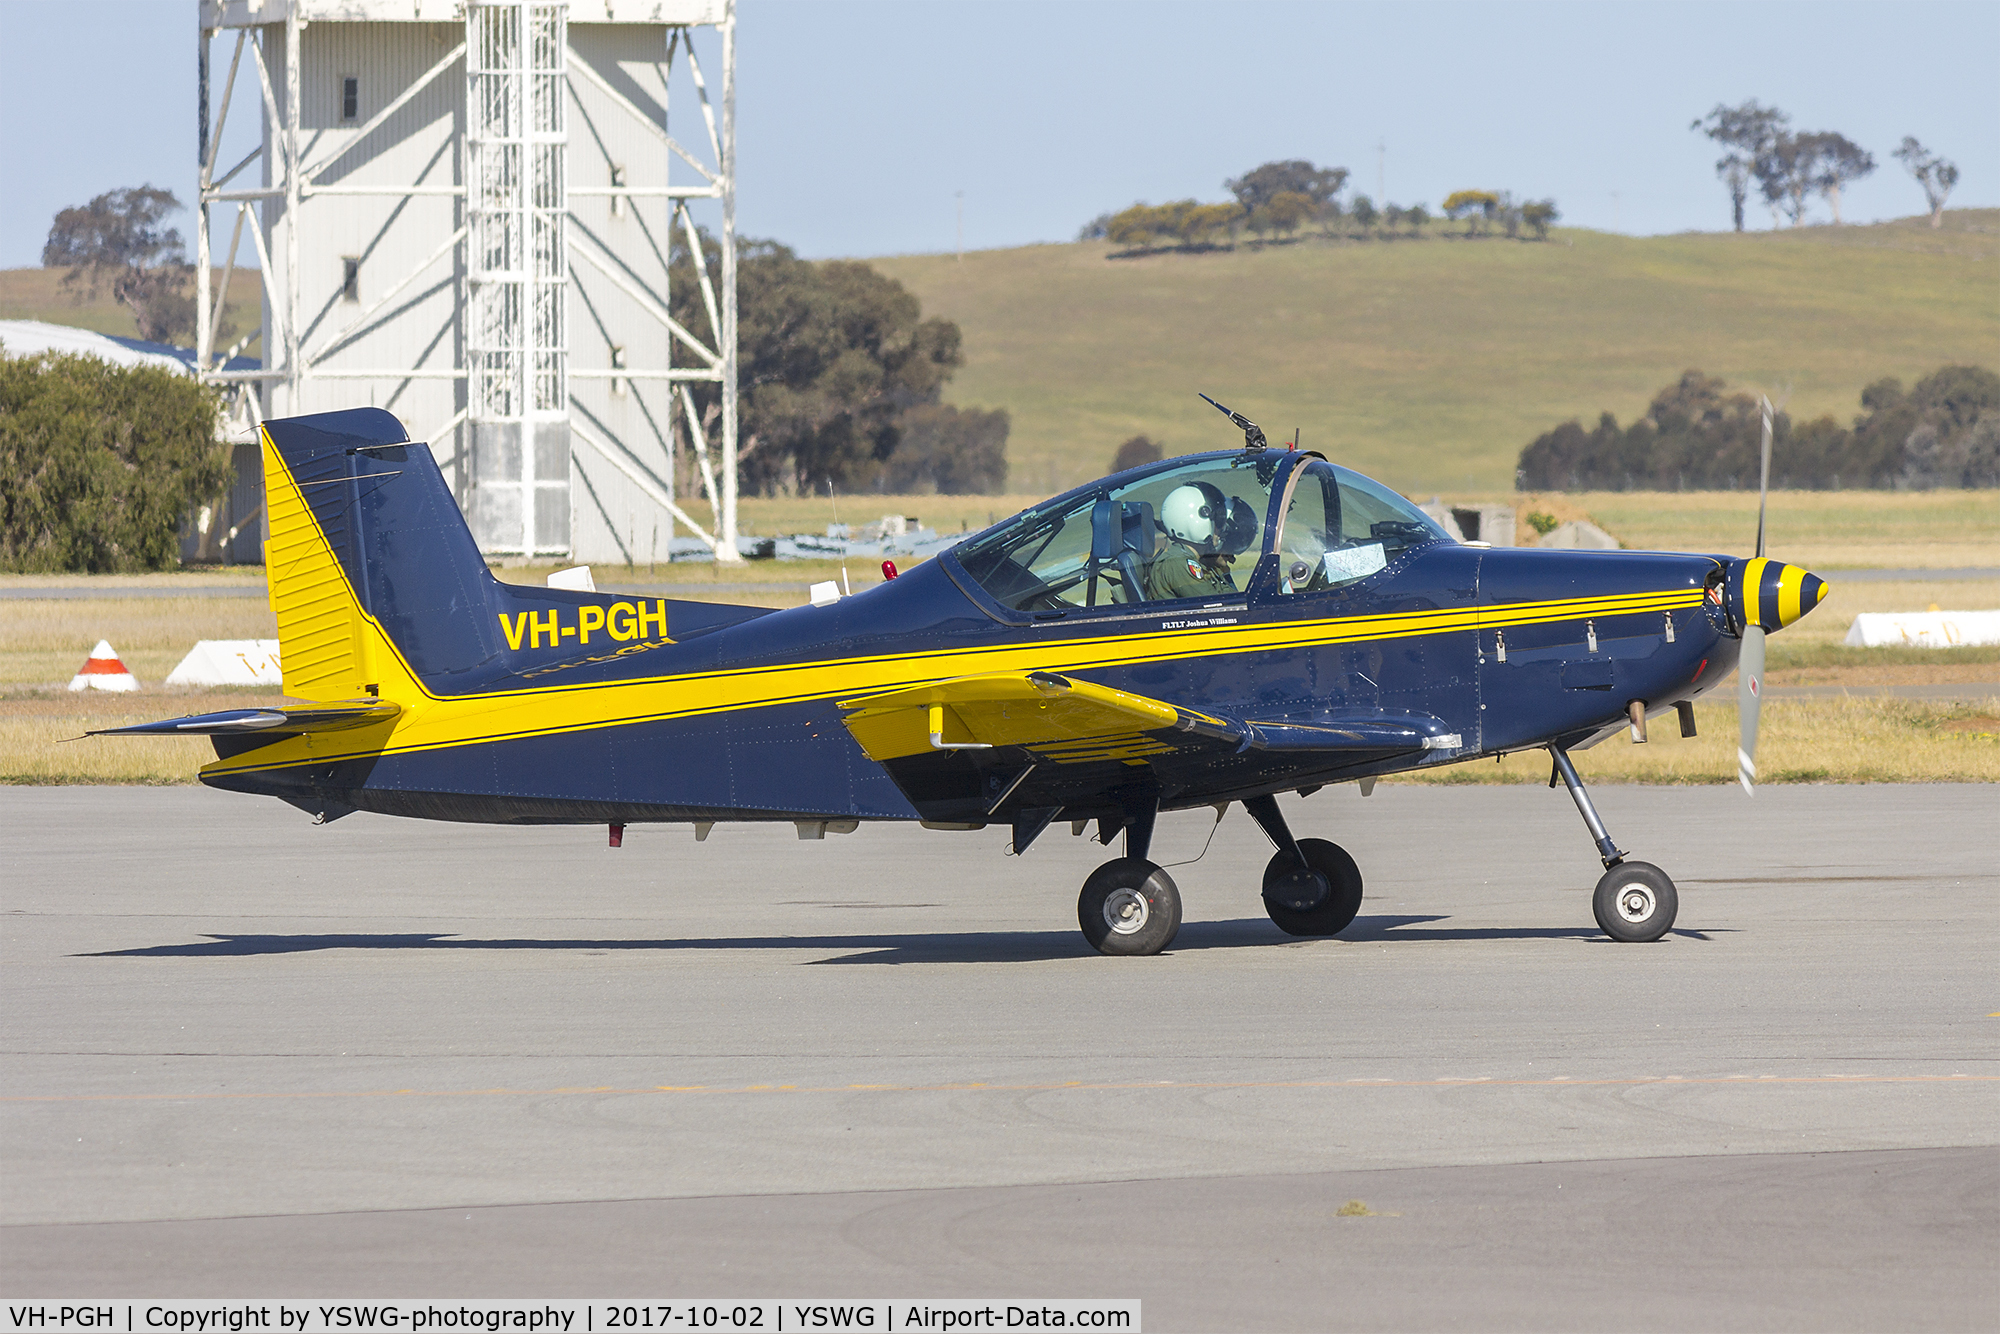 VH-PGH, 1975 New Zealand CT-4A Airtrainer C/N 059, BAE Systems Australia (VH-PGH) New Zealand Aerospace CT-4A Airtrainer taxiing at Wagga Wagga Airport.